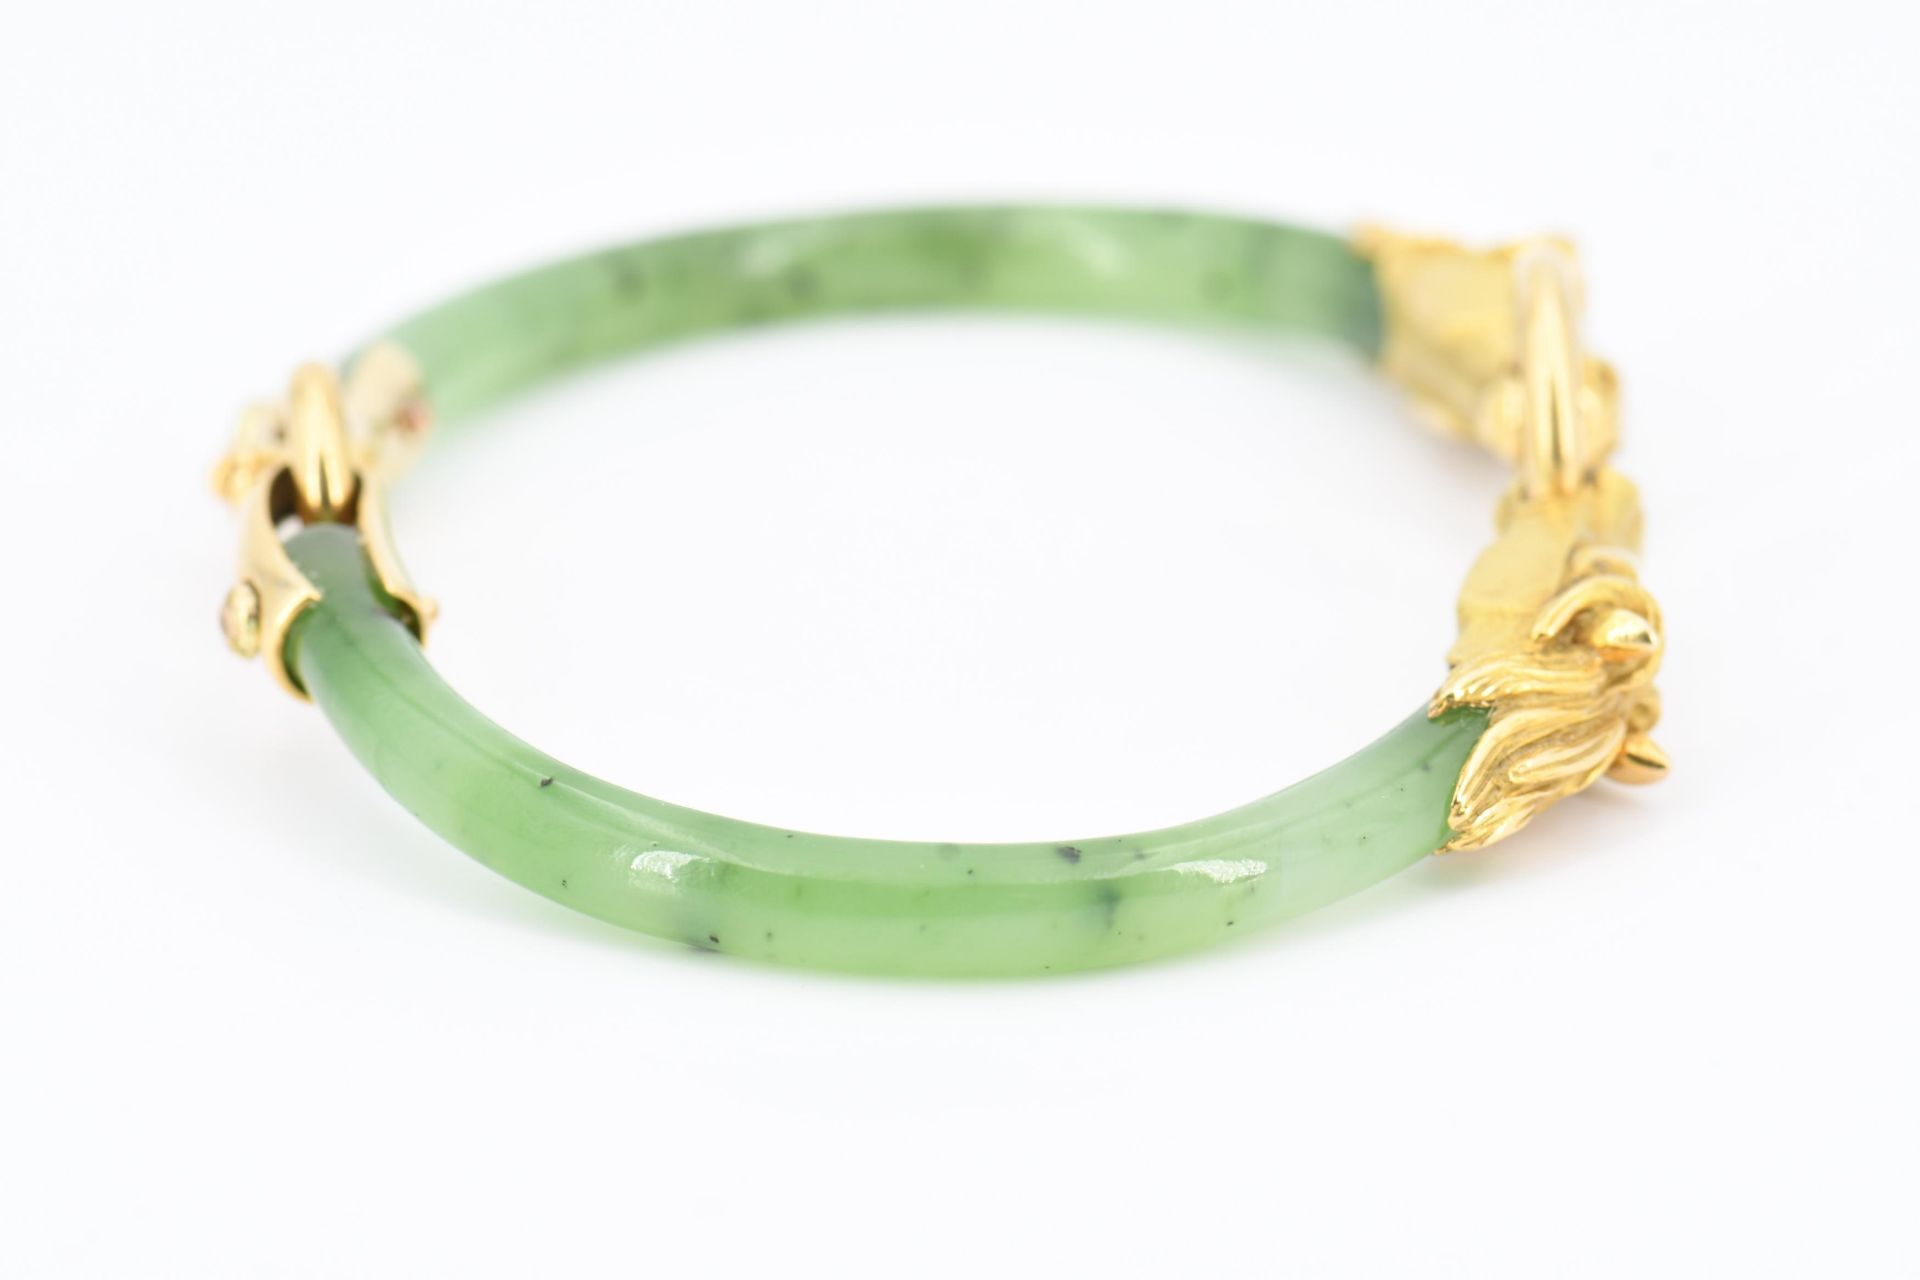 Jade-Bangle with Horse Motif - Image 3 of 6